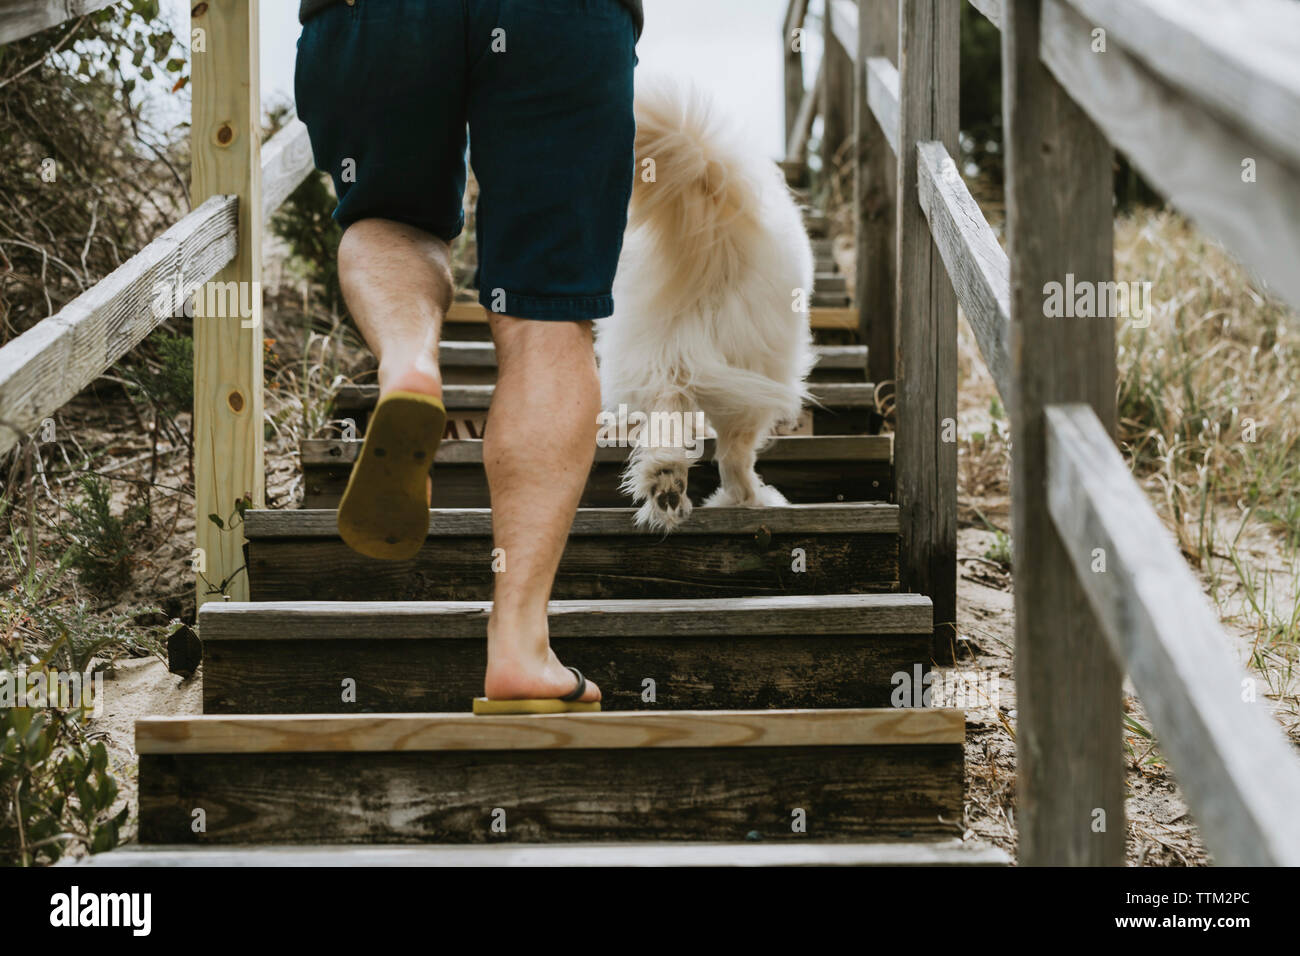 Low section of man with dog moving up on steps Stock Photo